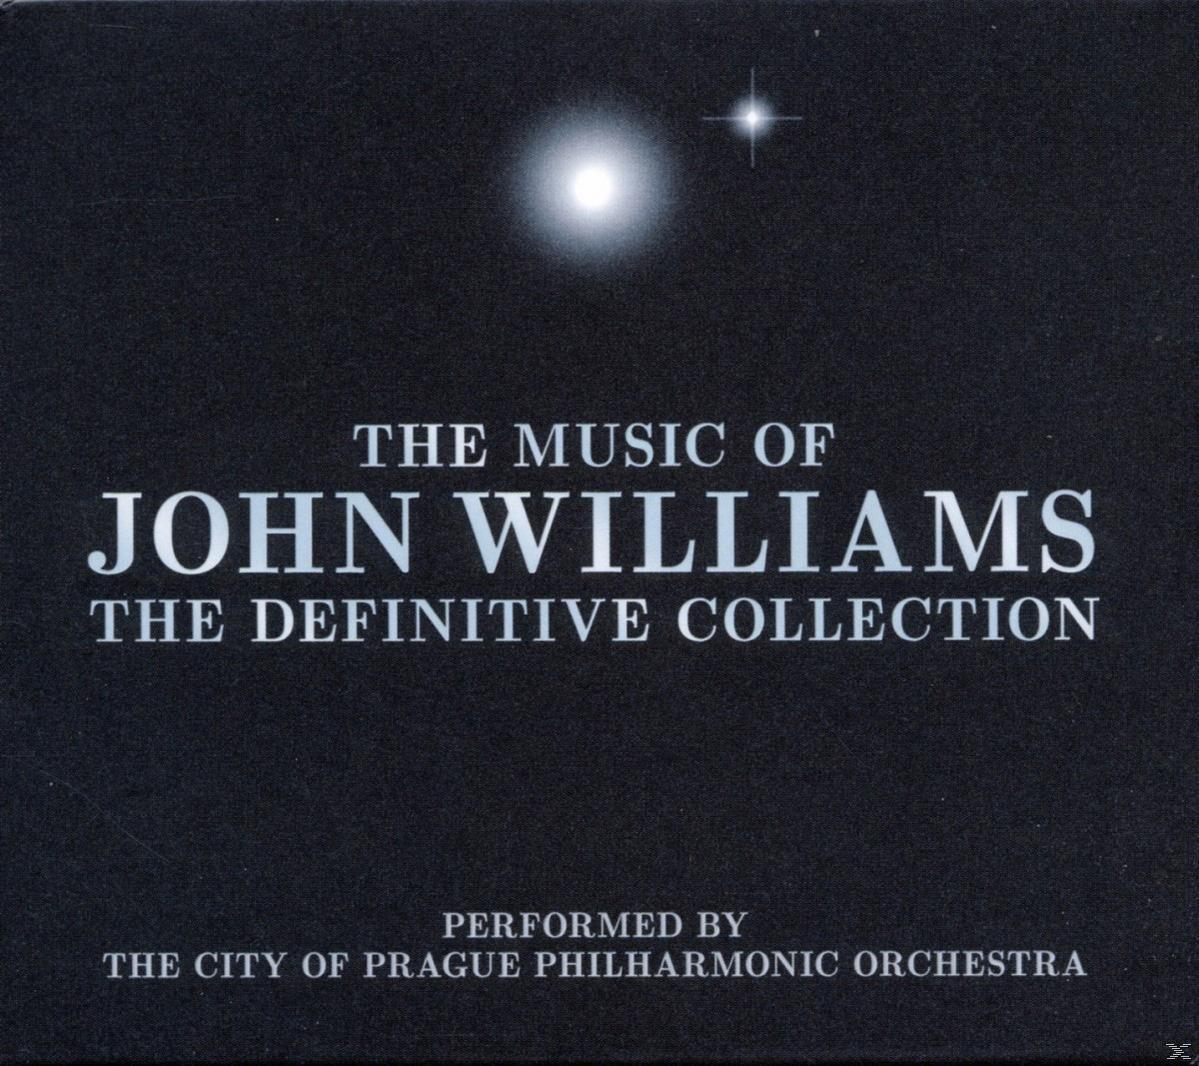 The City Of Music Definitive N.Y. Orchestra, Philharmonic - Works, John Music Orchestra - The Prague The London Jazz Collection Williams (CD) - Of